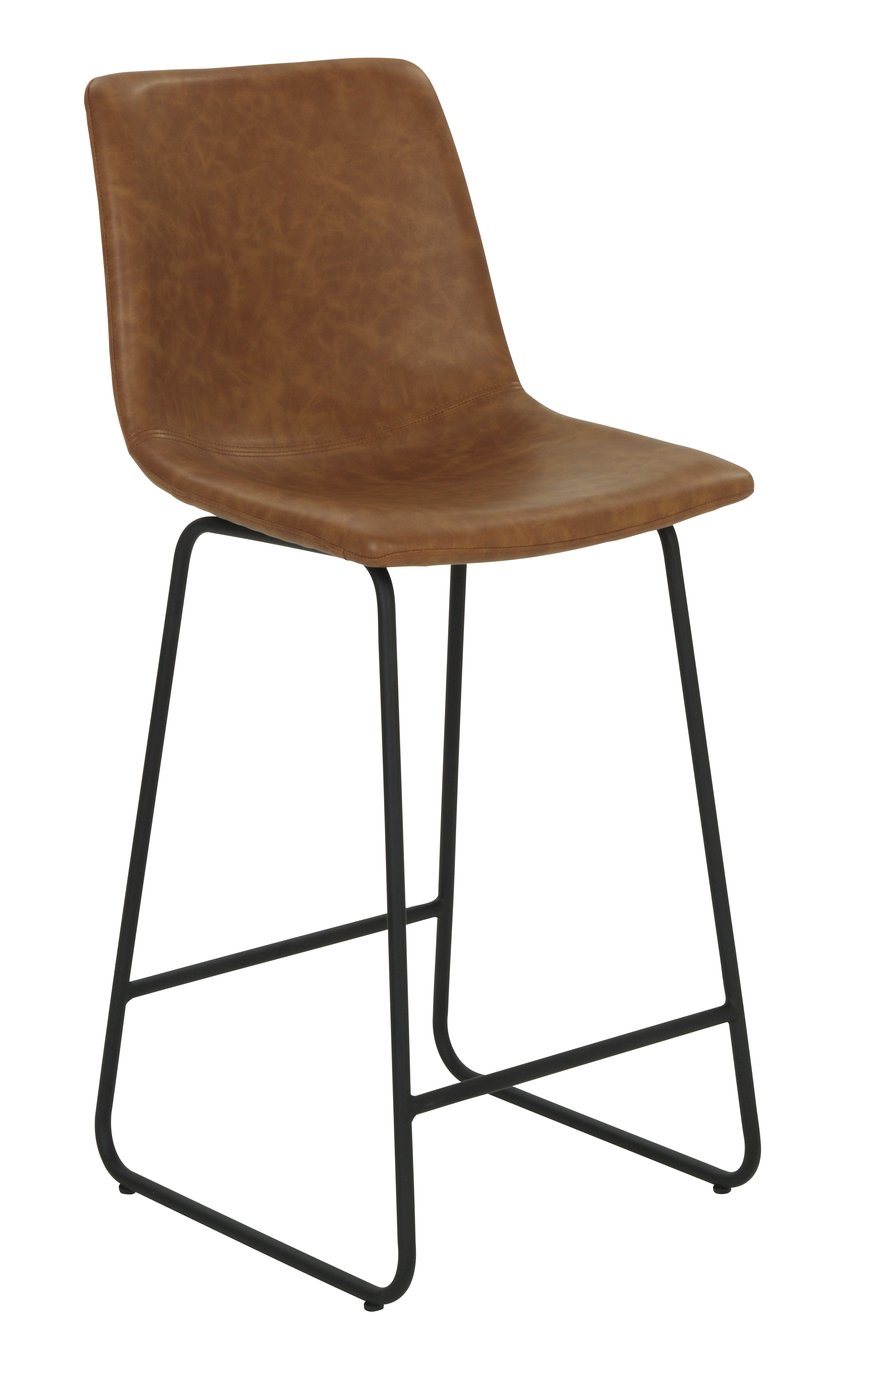 Argos Home Joey Faux Leather Bar Stool Review